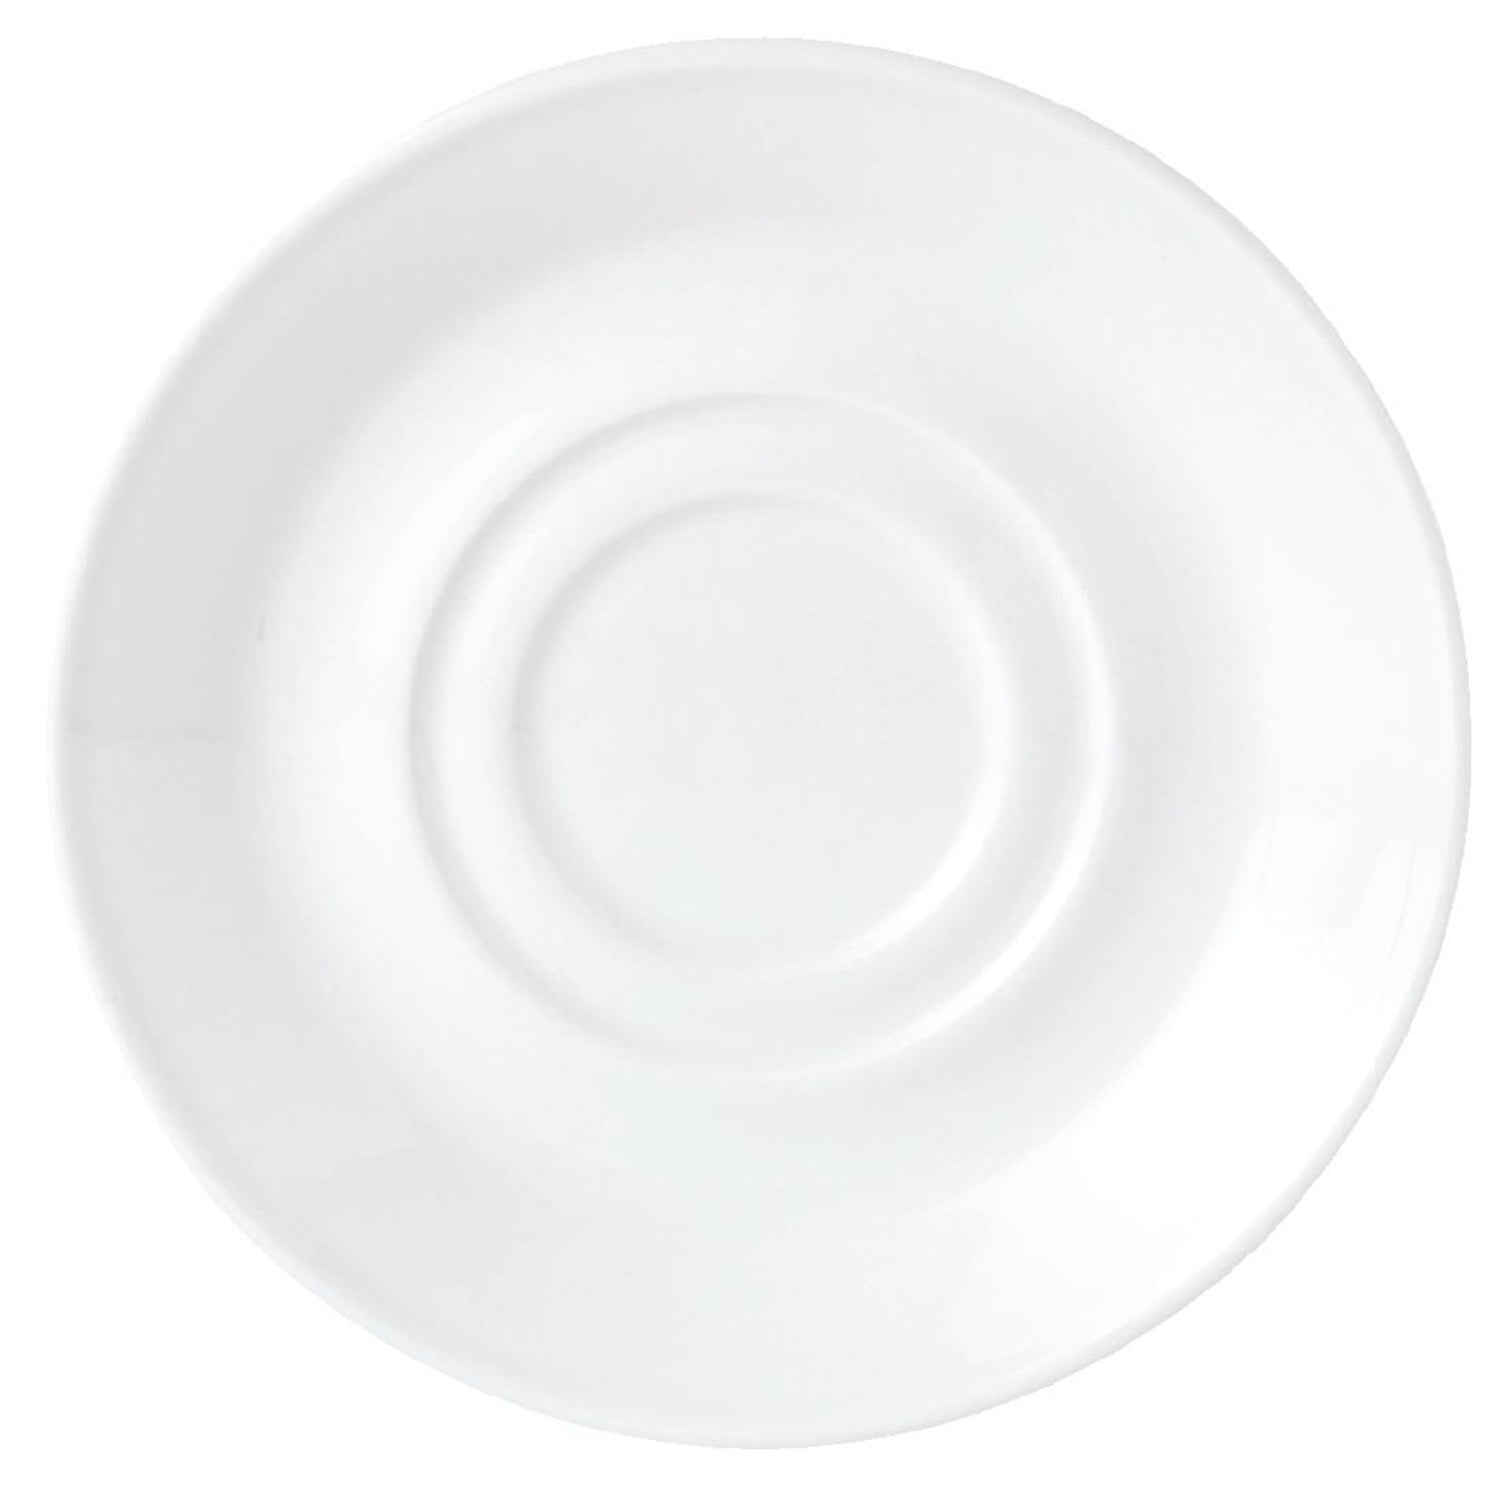 Saucer | Steelite Simplicity White Low Cup Saucers 145(Ø)mm | Pack of 36